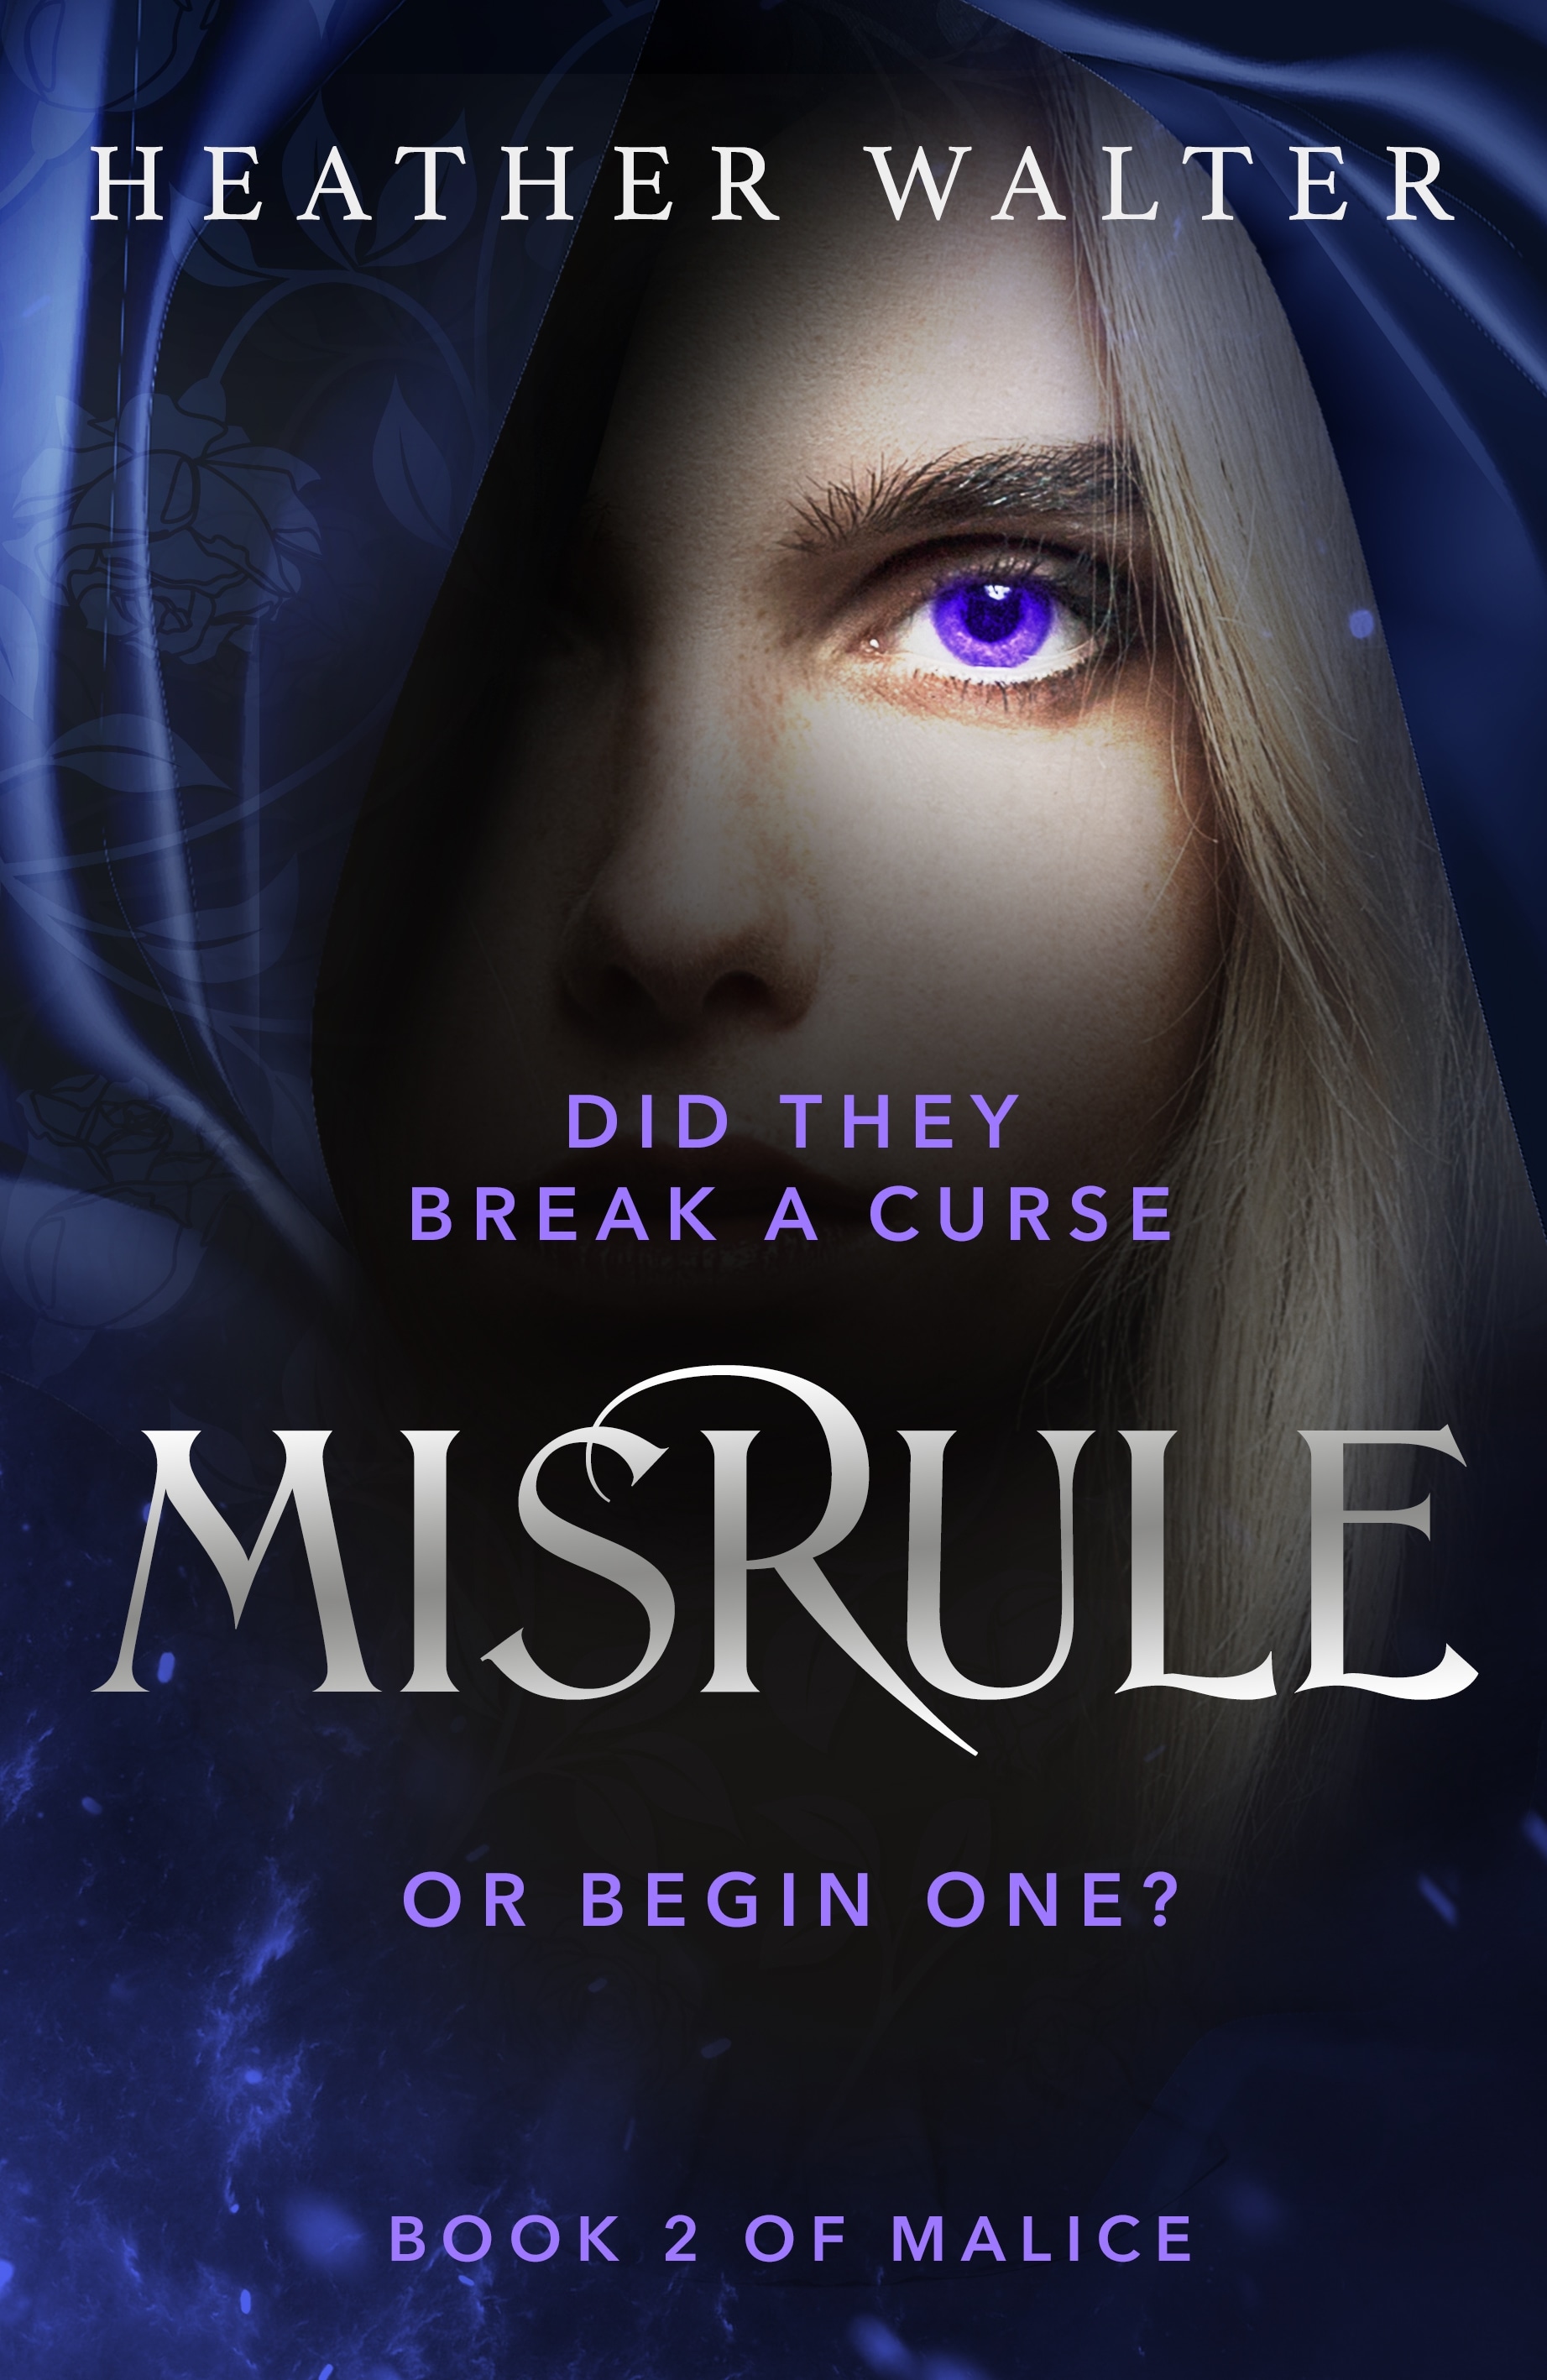 Book “Misrule” by Heather Walter — March 23, 2023